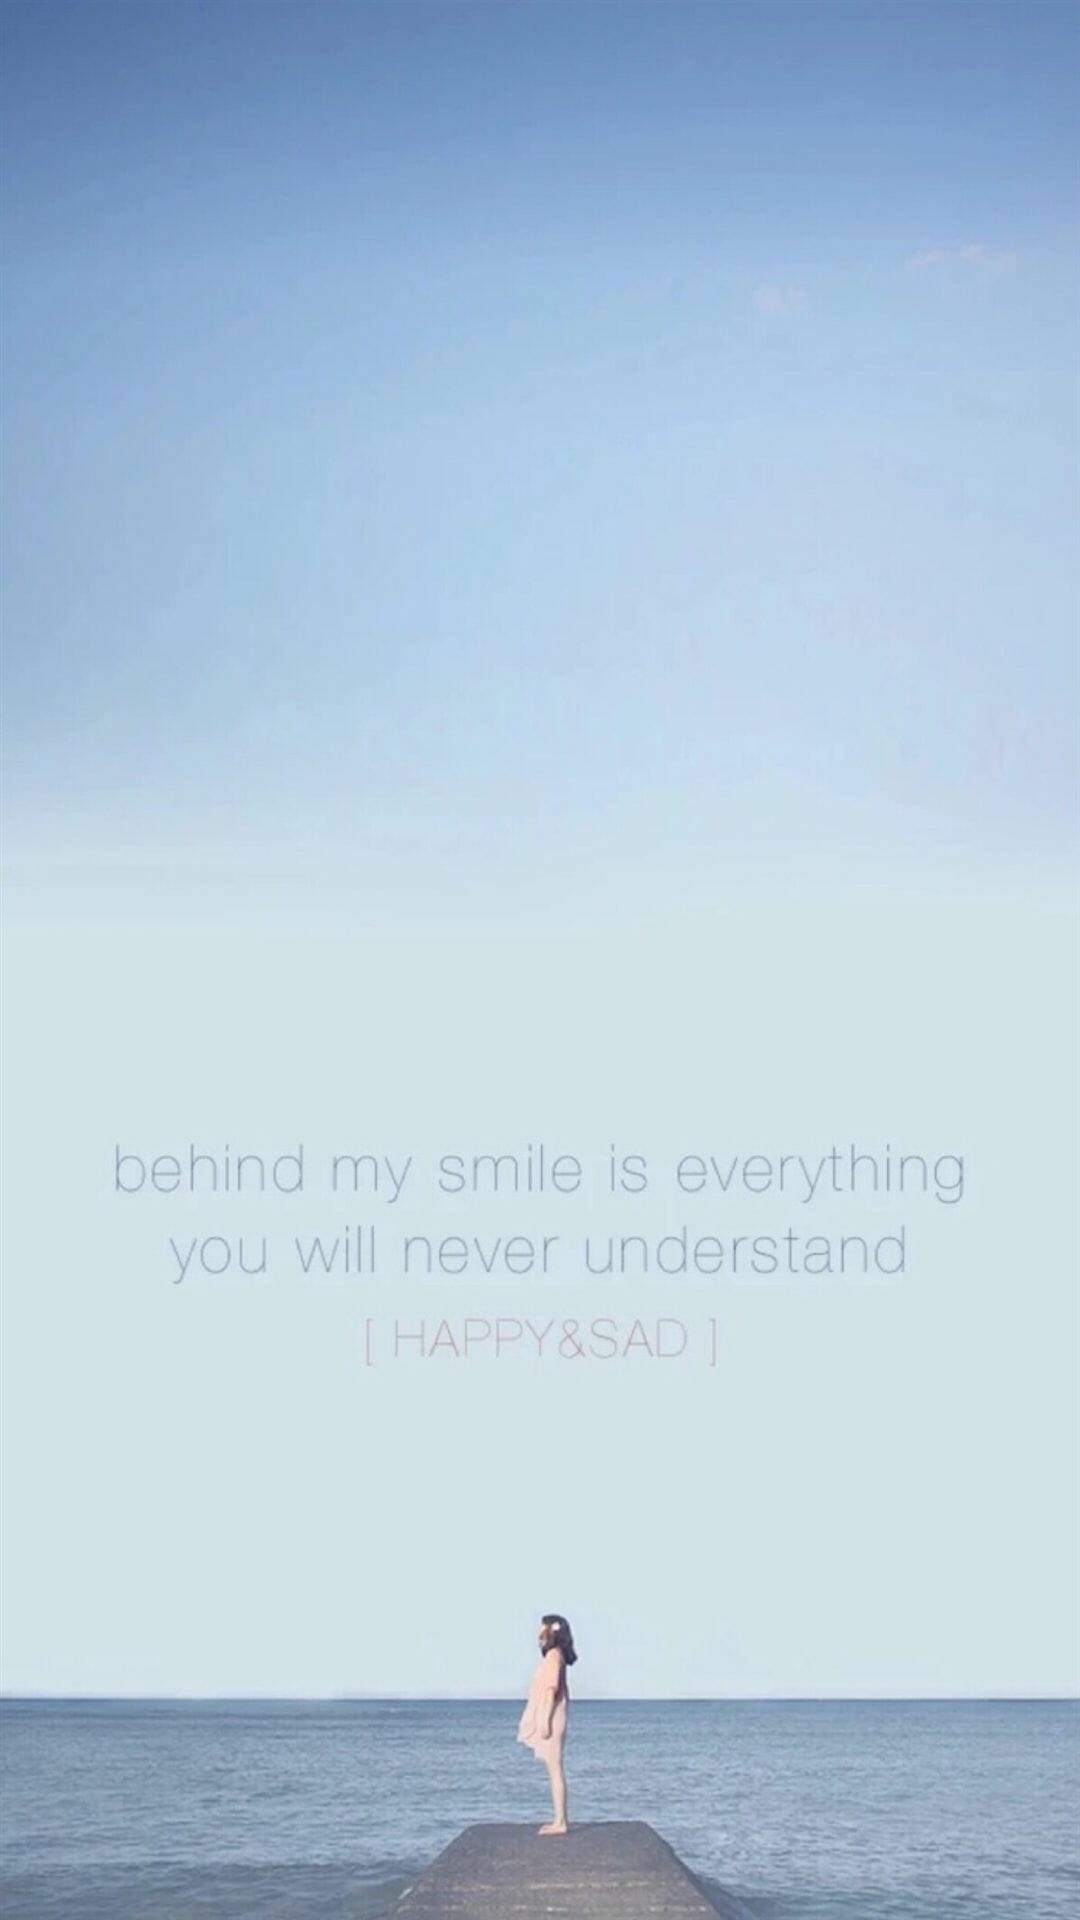 Behind my smile is everything you will never understand - Quotes